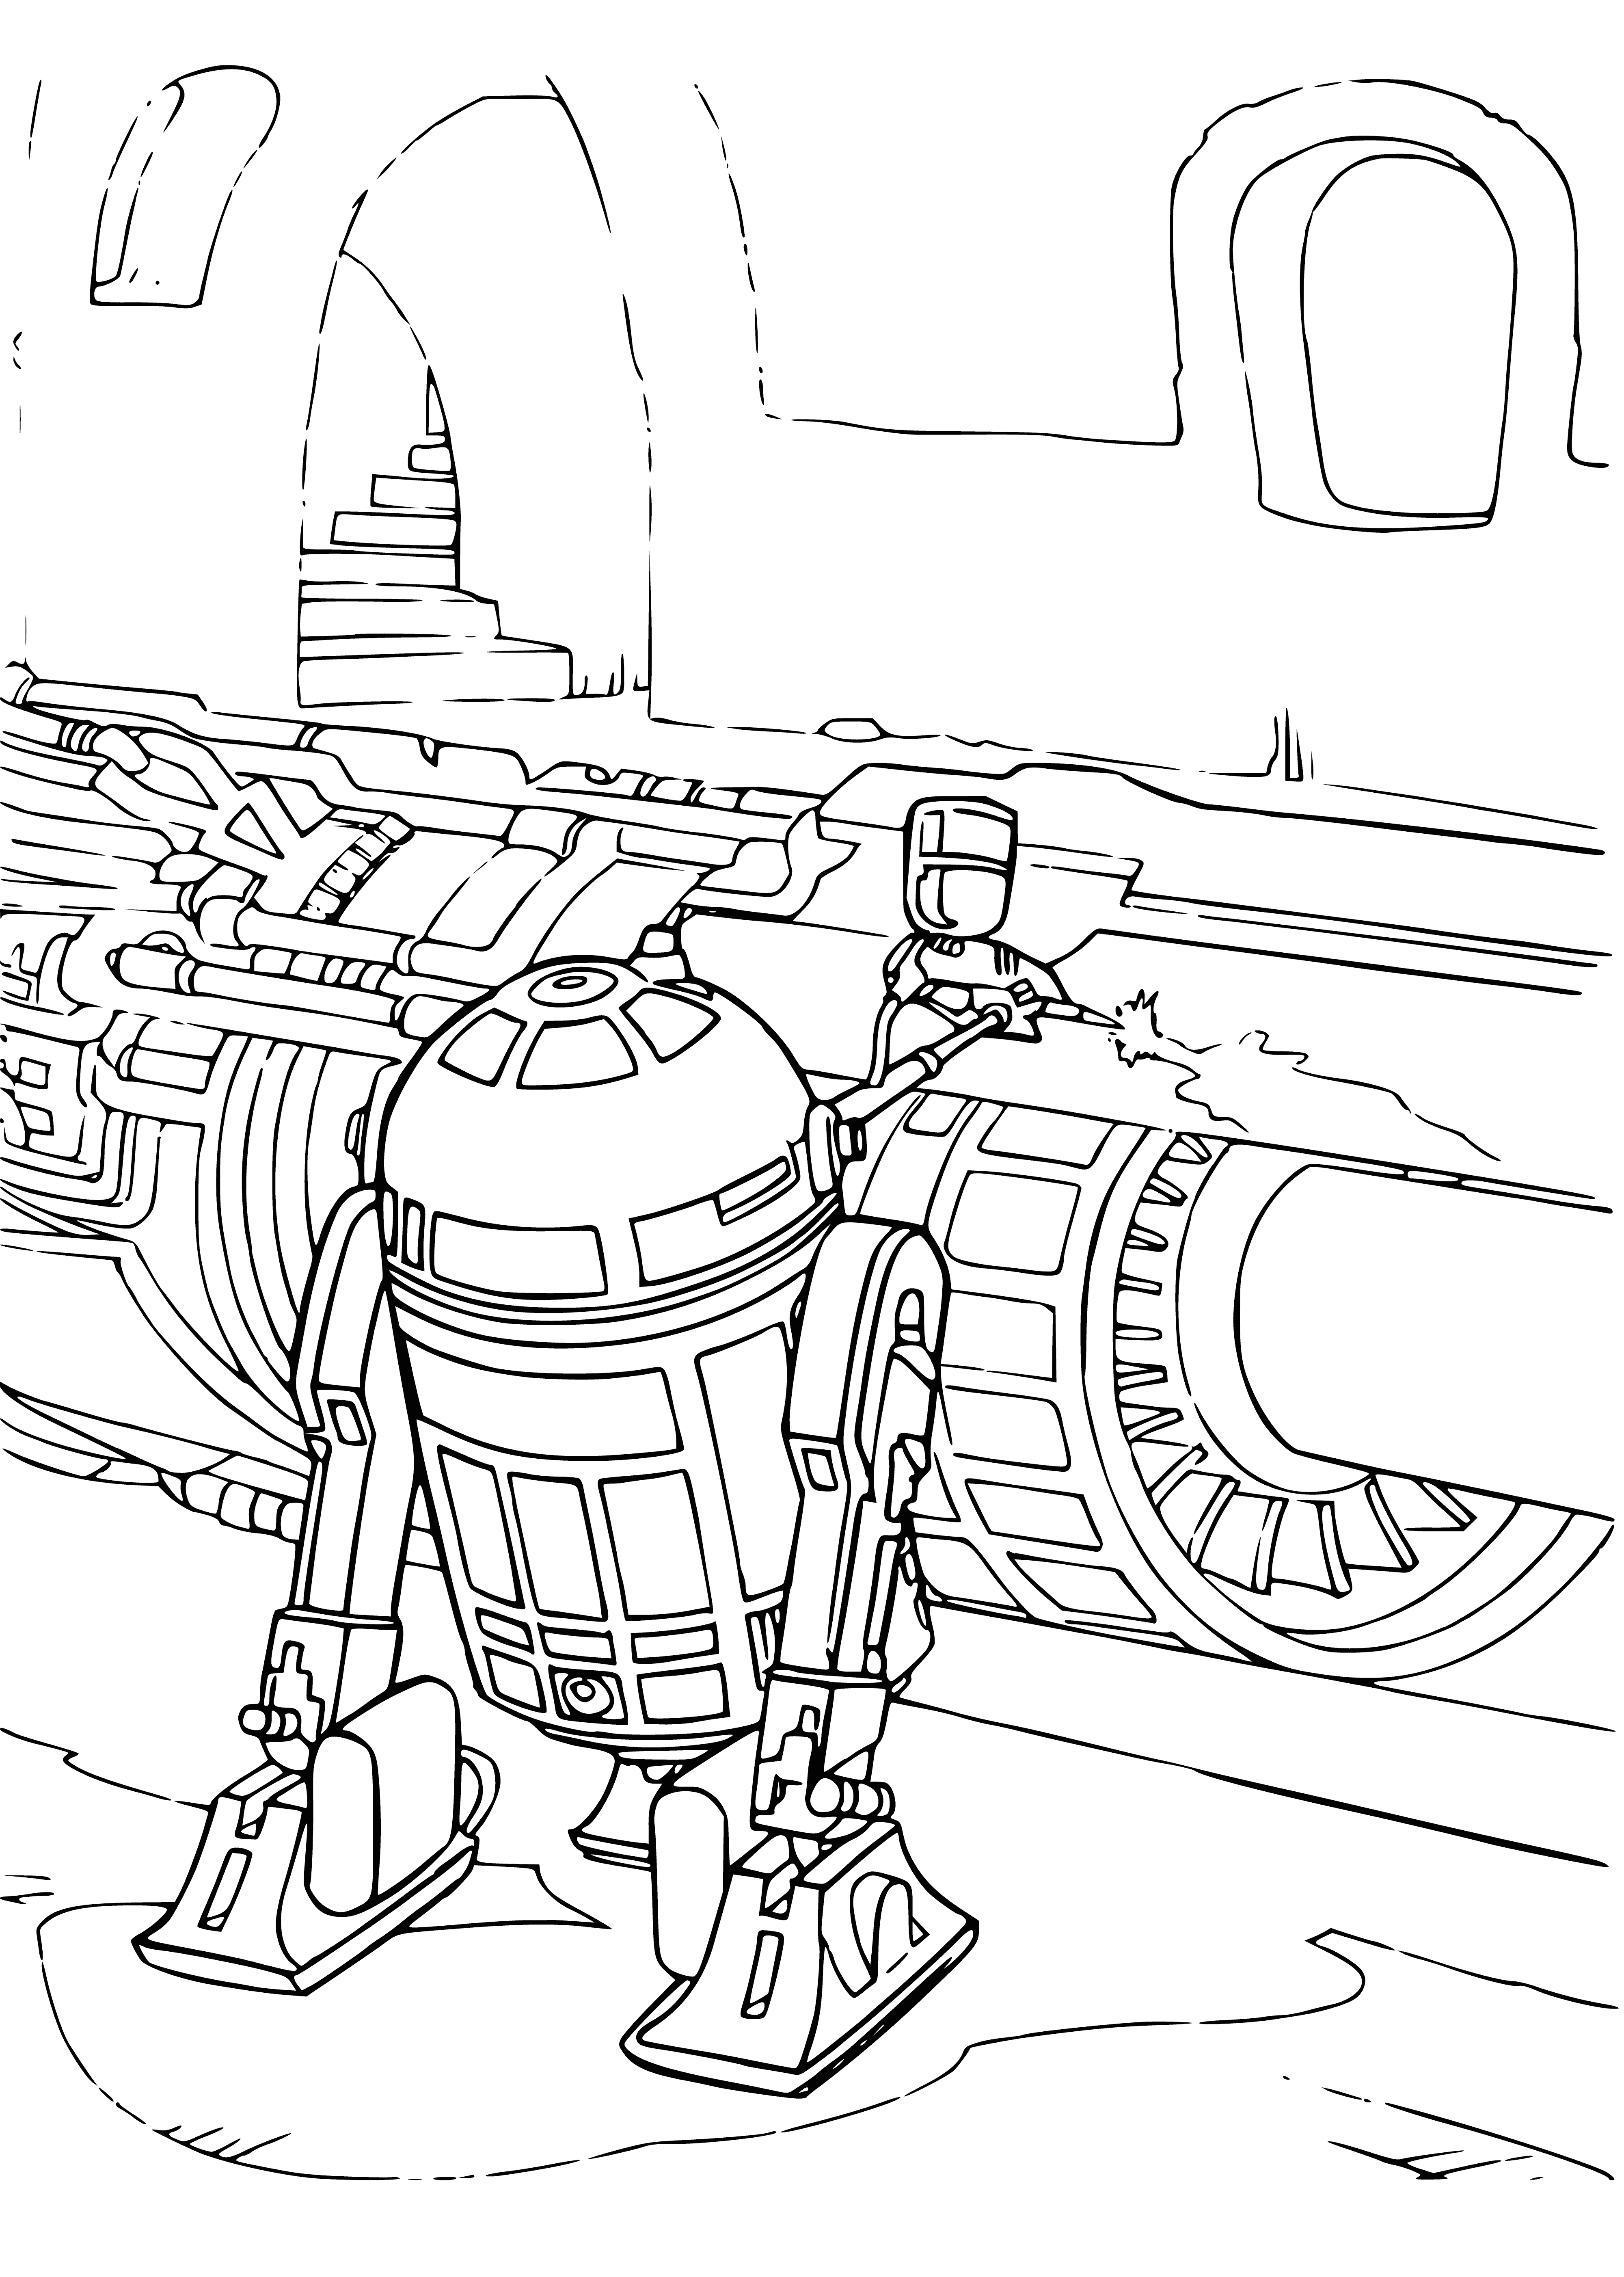 coloring page: Robot from Star Wars universe: R2-D2; round body, dome-shaped head; blue, white, red & green accents. Red & green eye, green panel on head.